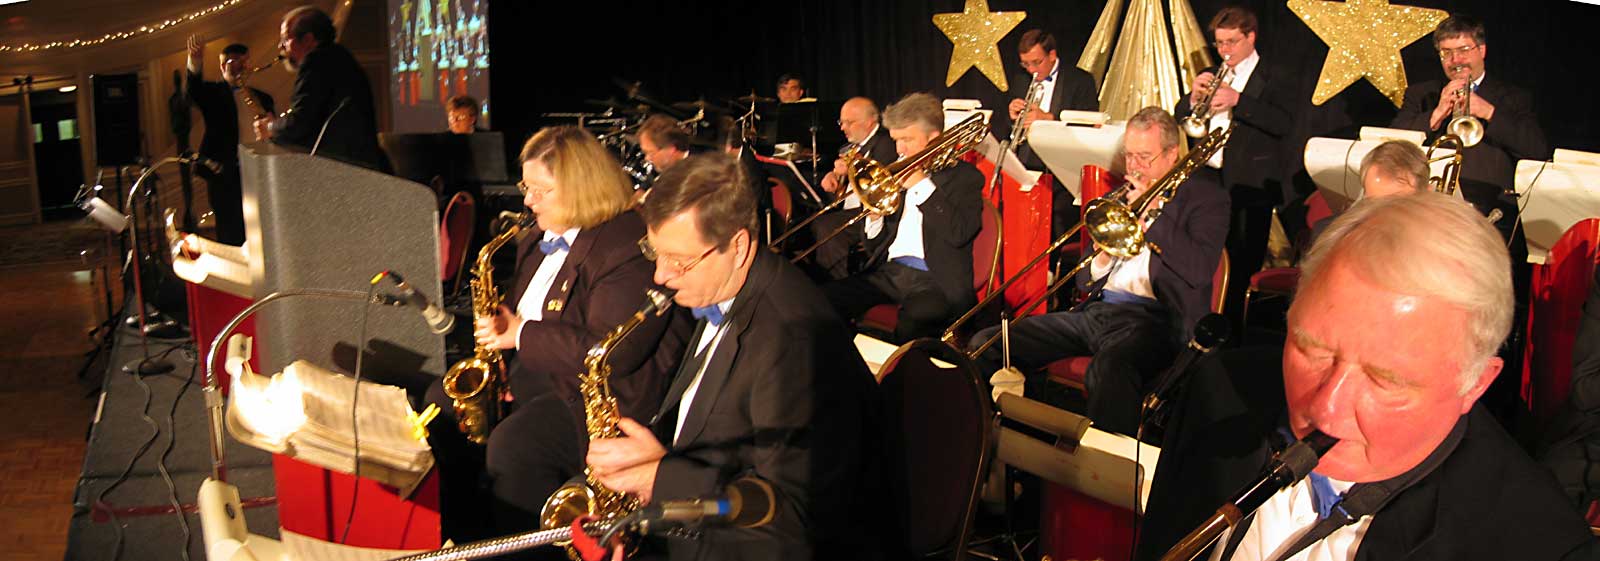 The band played an instrumental feature before many guests arrived for dinner.